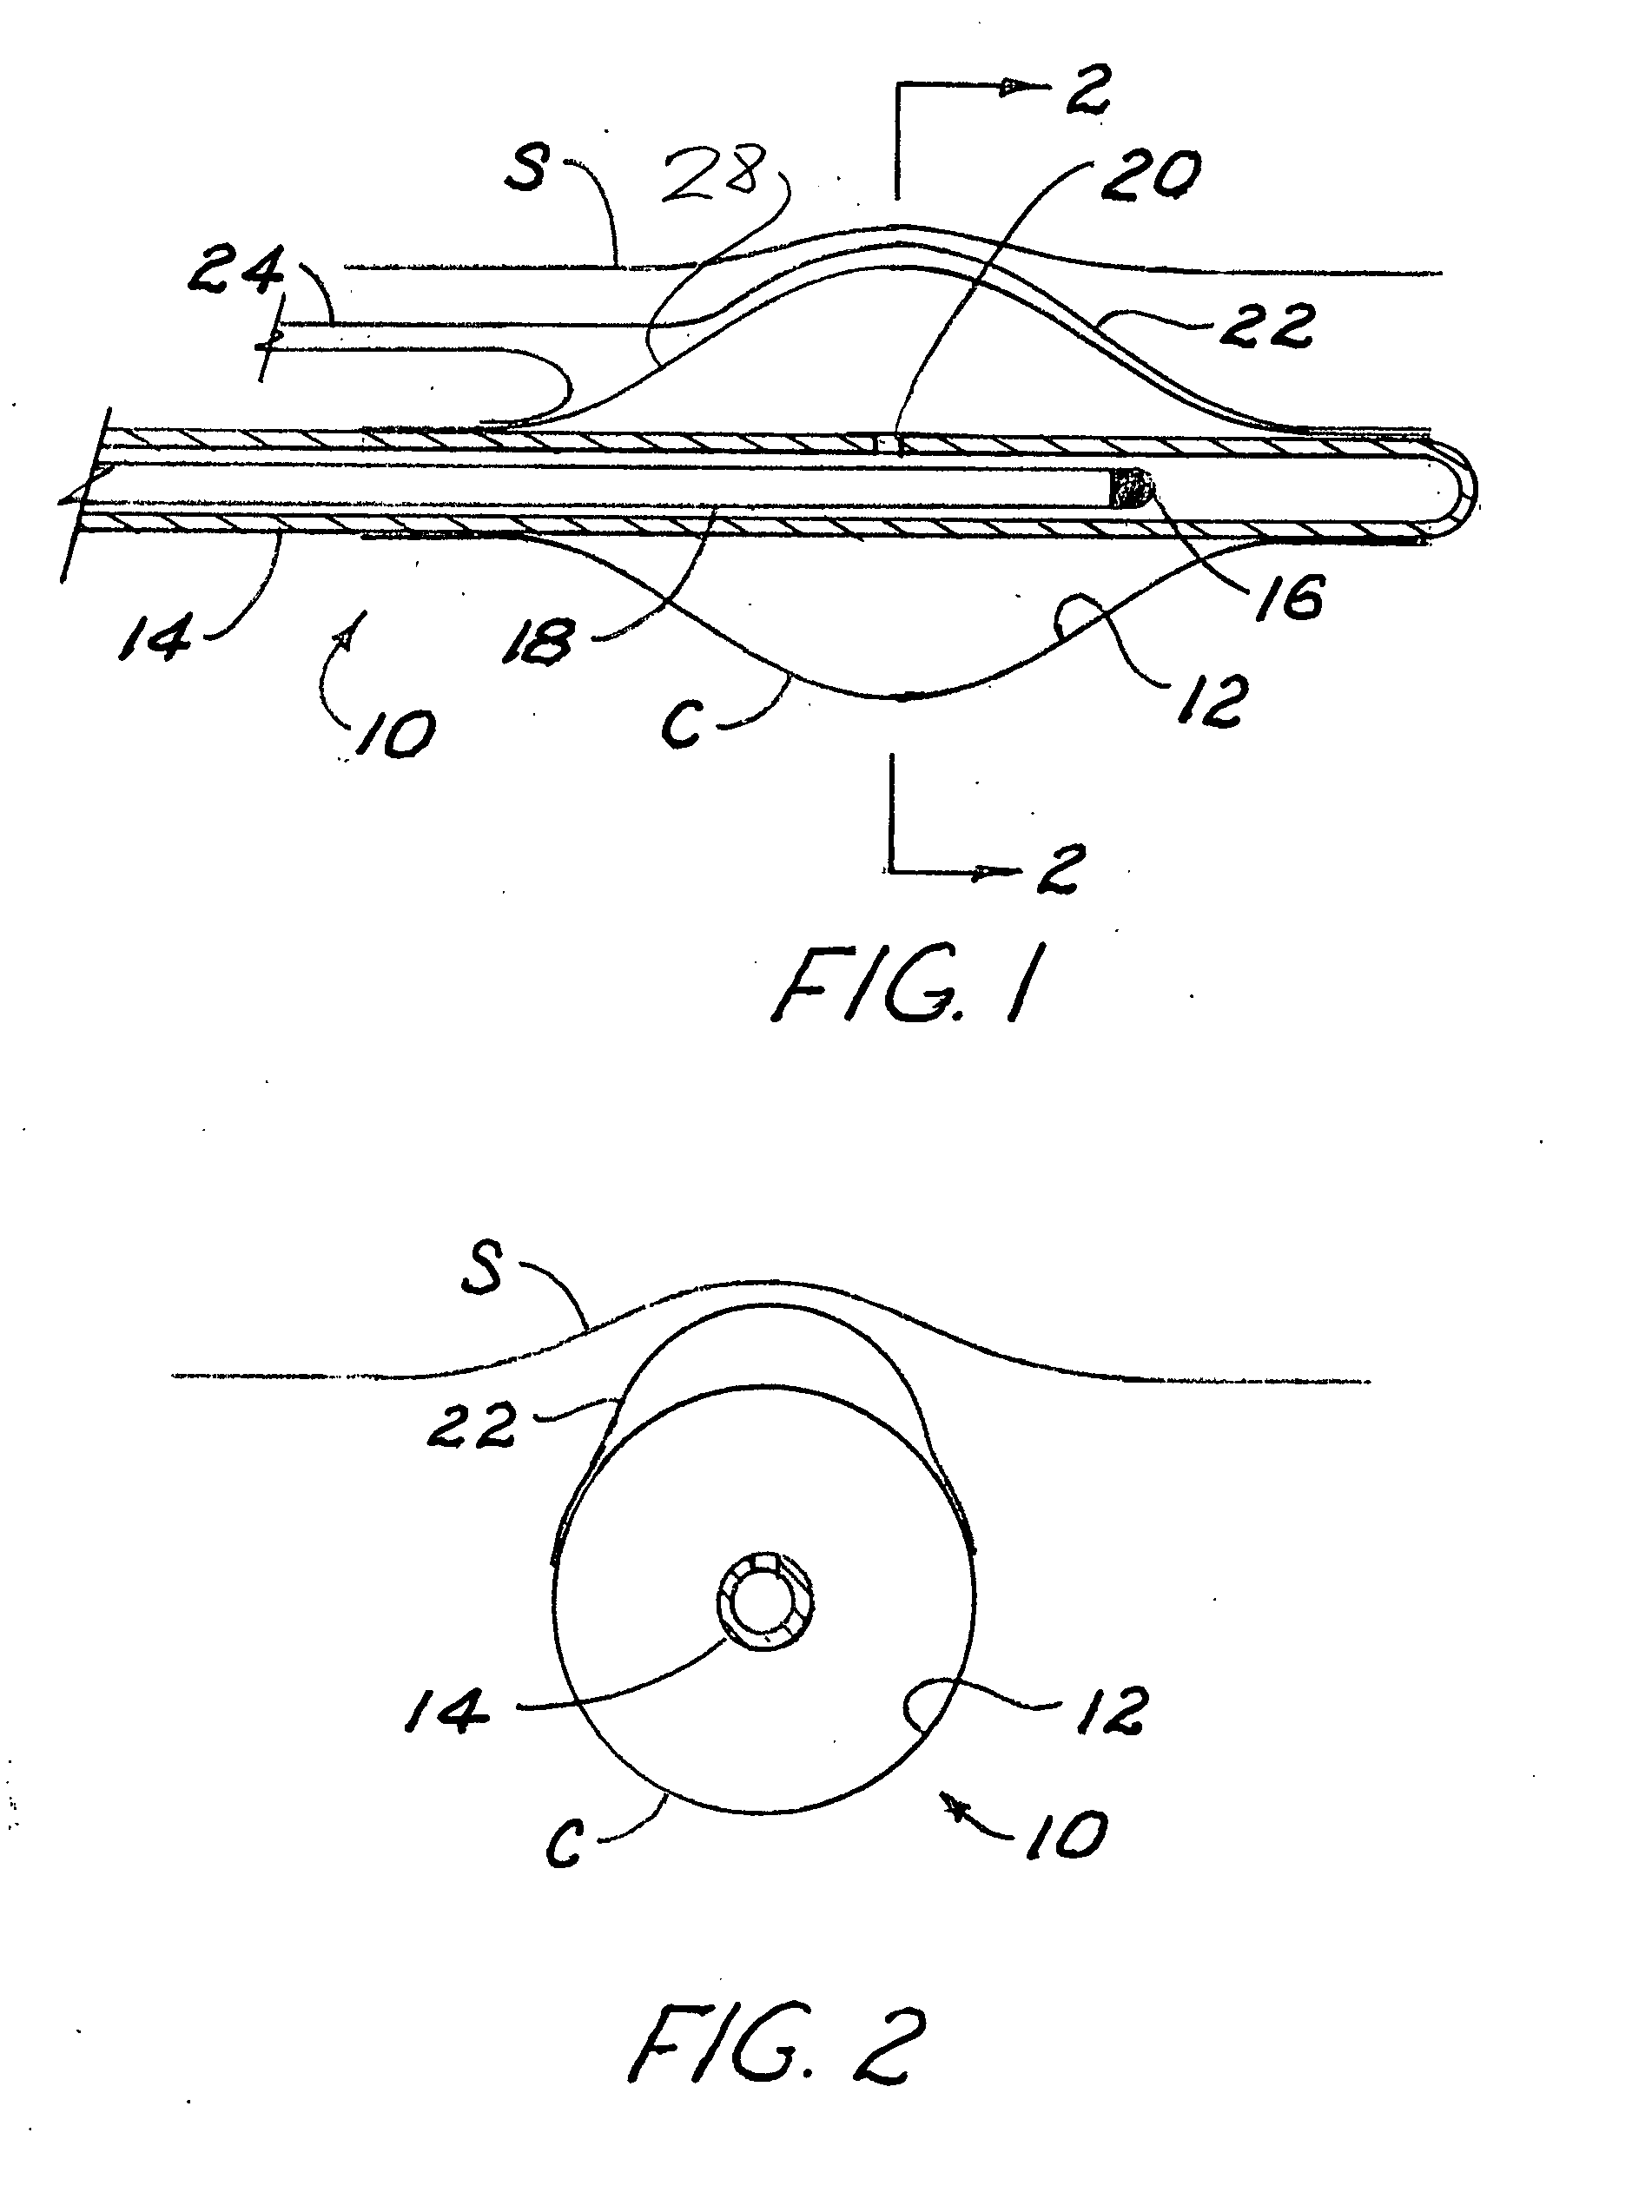 Method and apparatus for modifying distance from a brachytherapy radiation source to sensitive anatomical structures